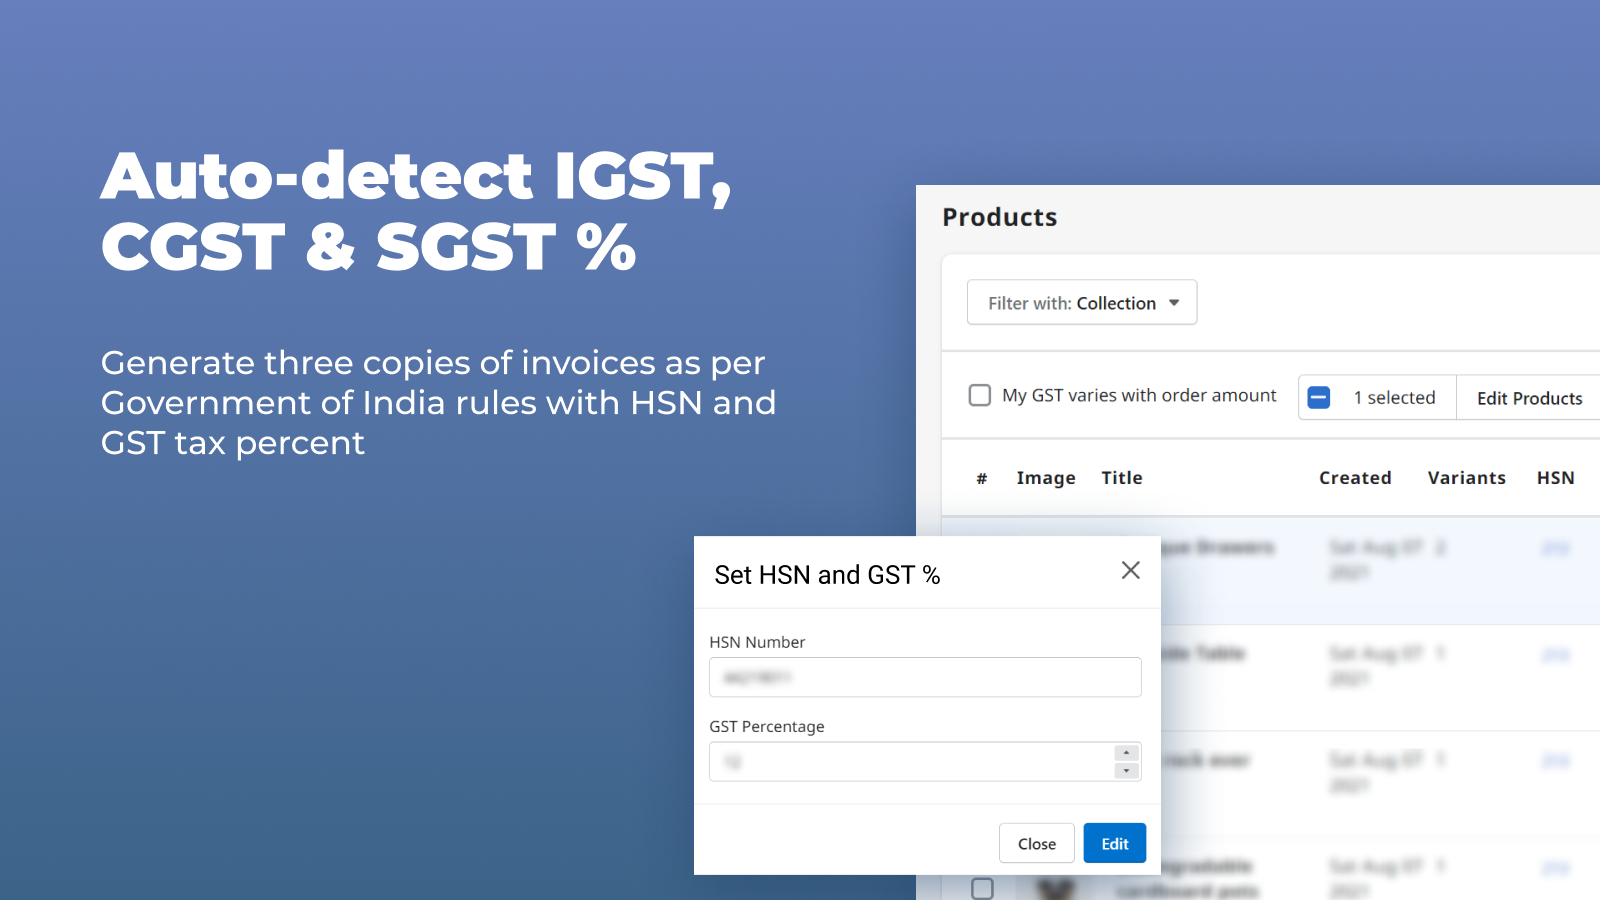 Auto calculate IGST, CGST and SGST as well as GST and HSN